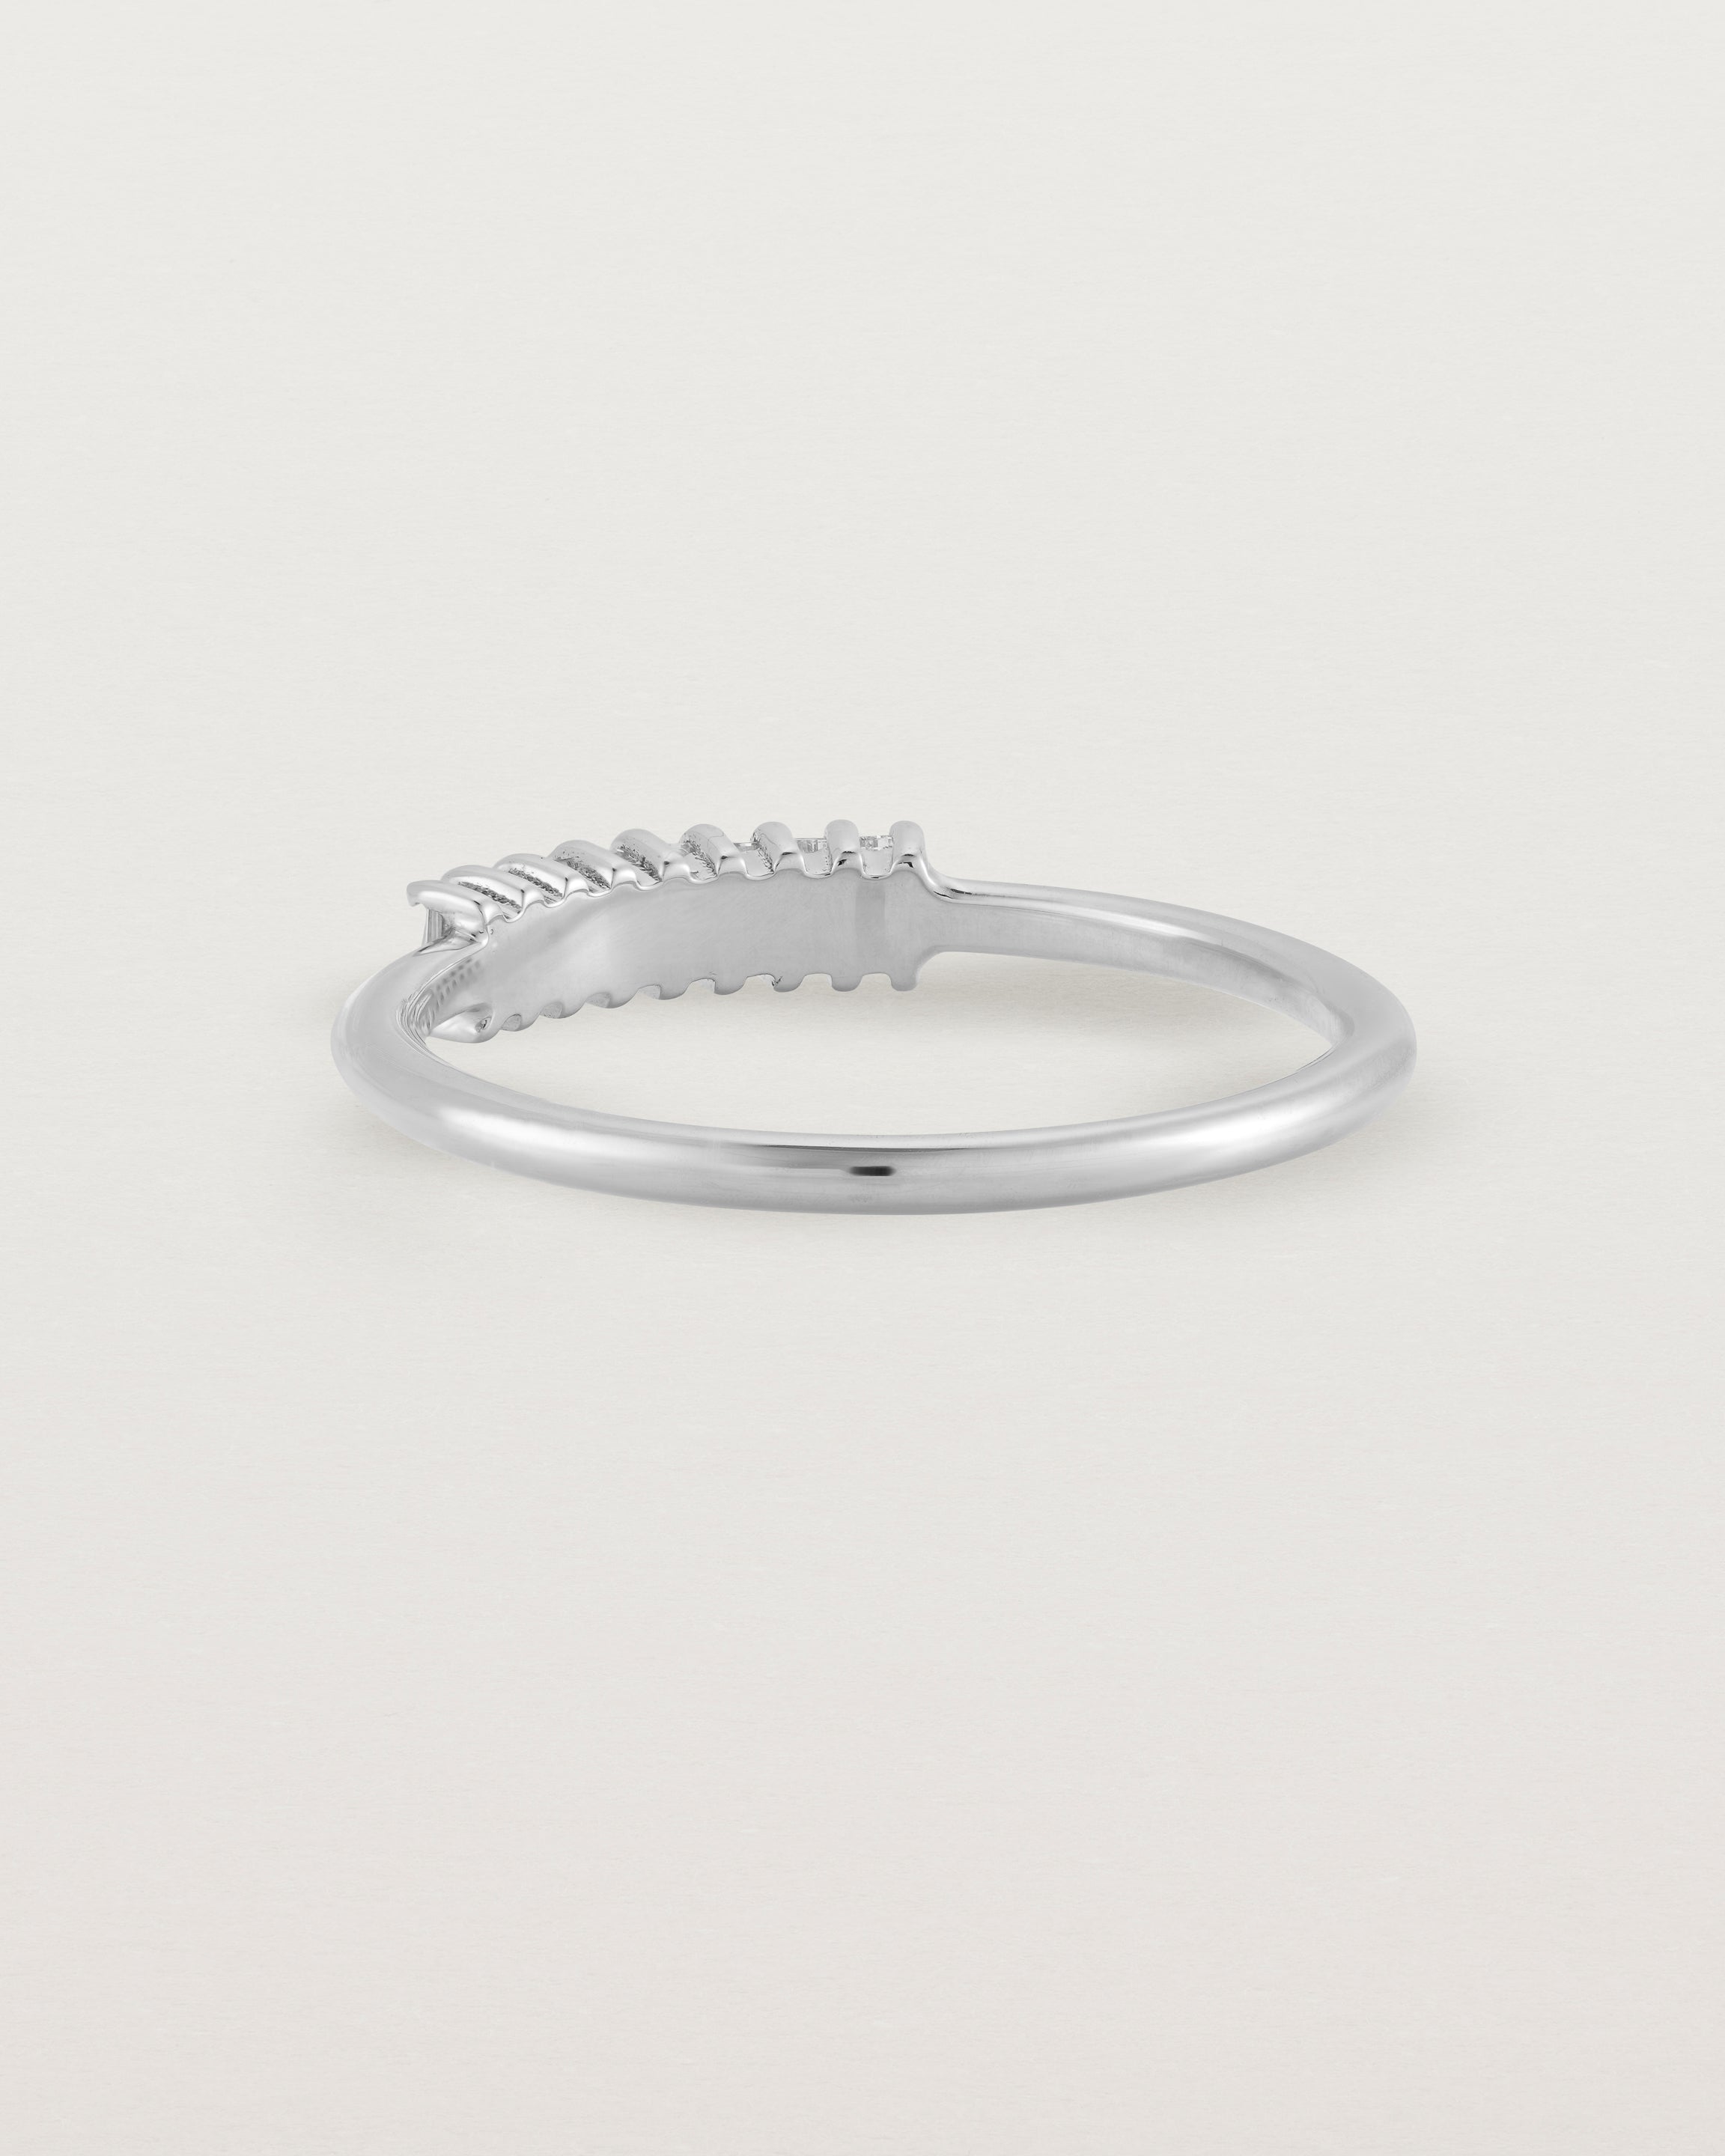 Back view of the Sena Wrap Ring | Diamonds in White Gold.